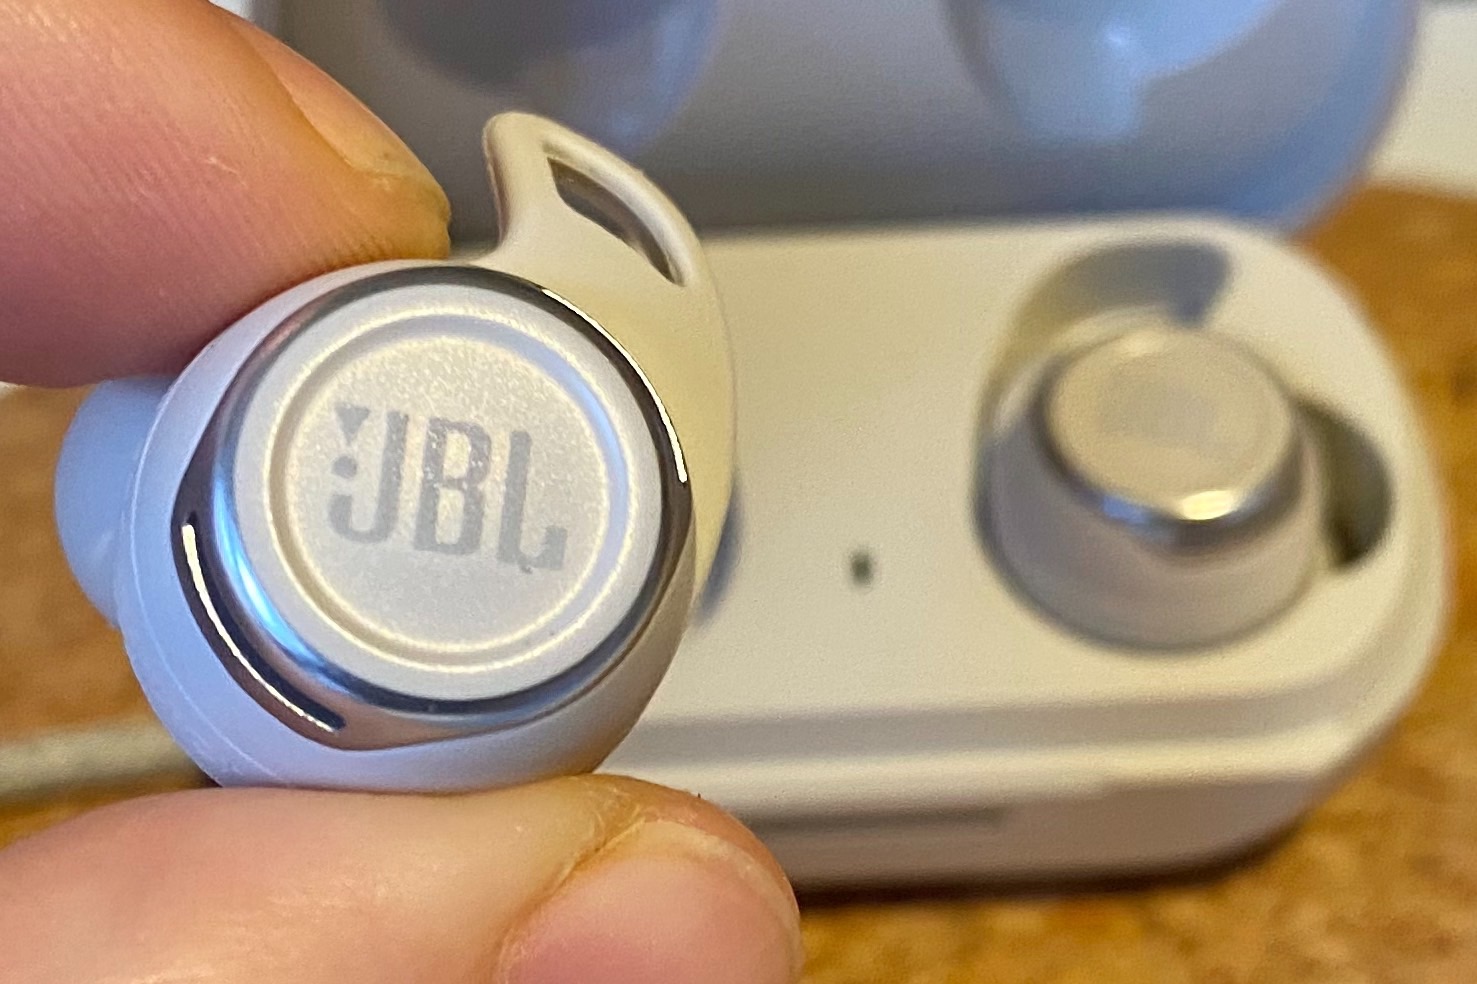 JBL Reflect Flow Pro Review: Go With the Flow - Tech Advisor